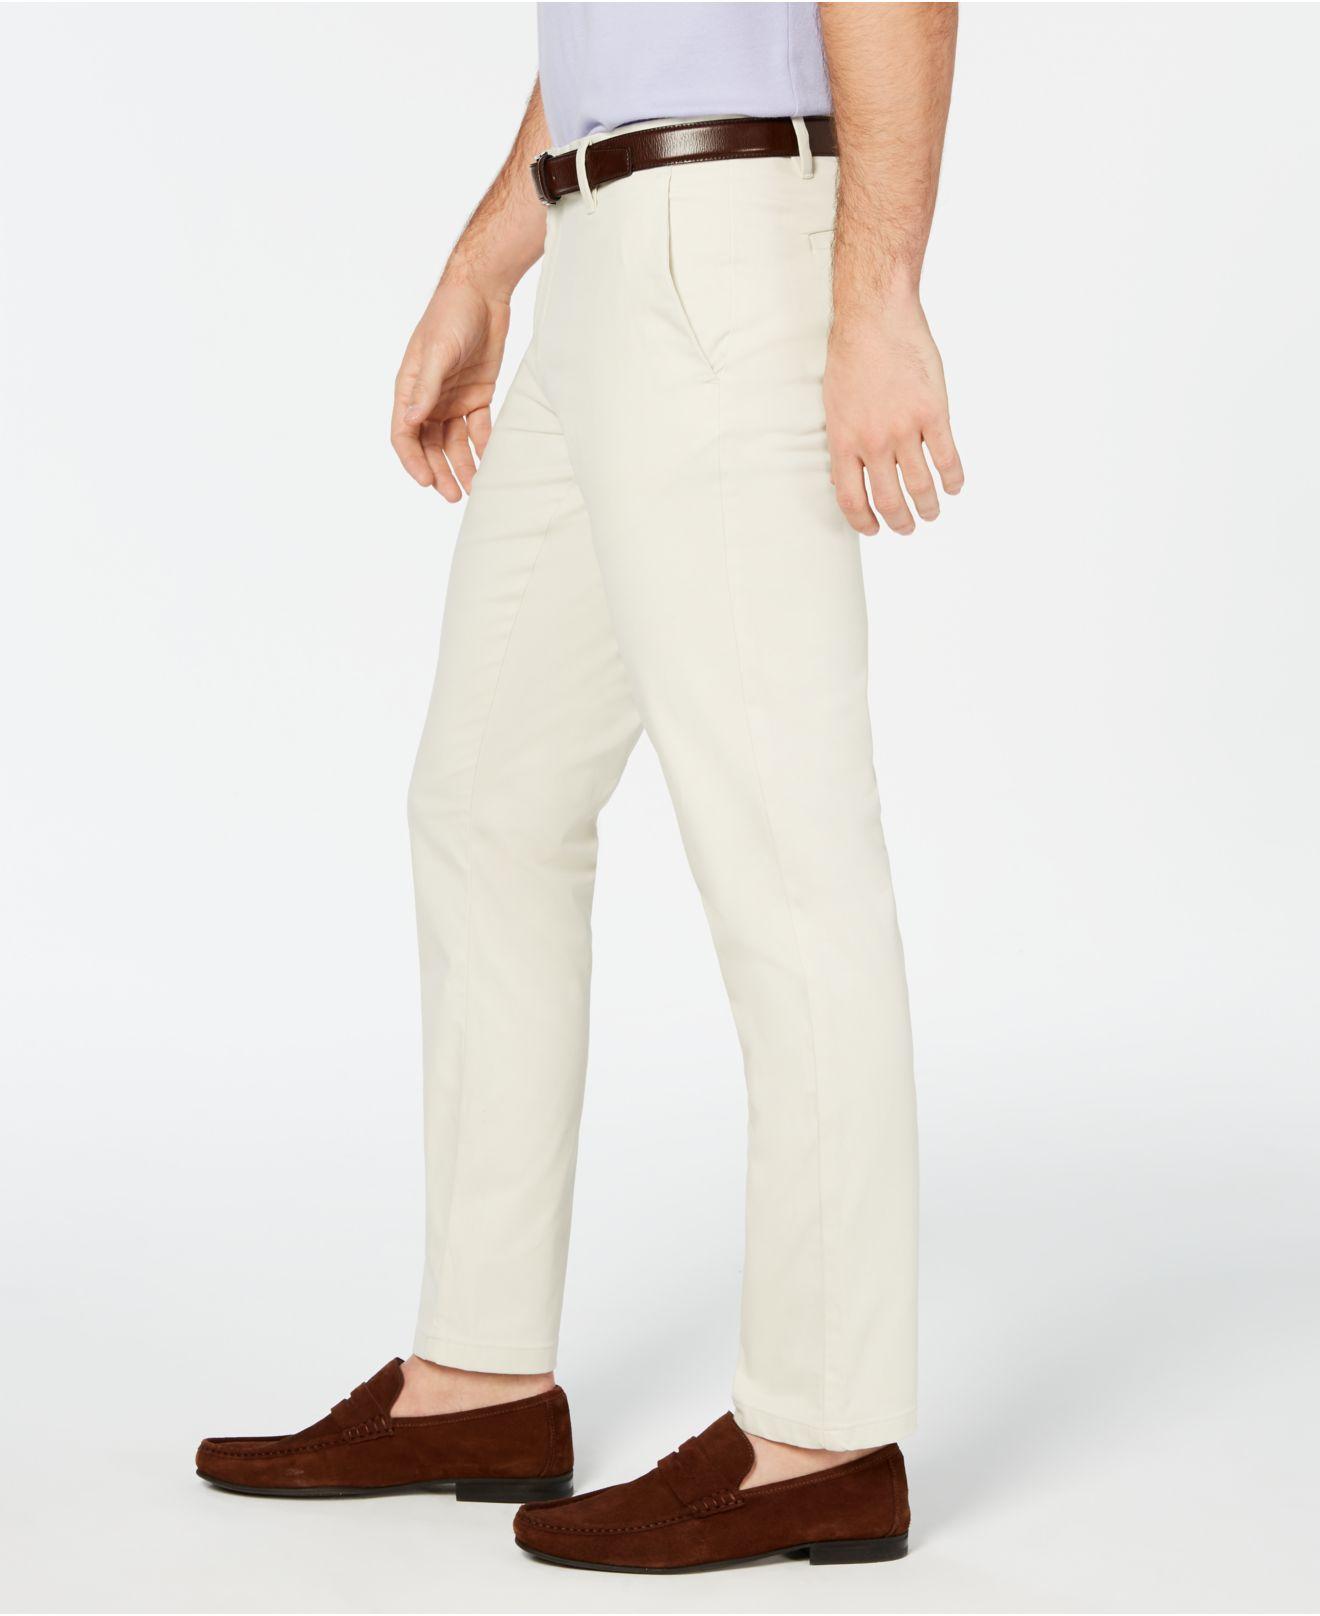 DKNY Bedford Slim-straight Fit Performance Stretch Sateen Pants in ...